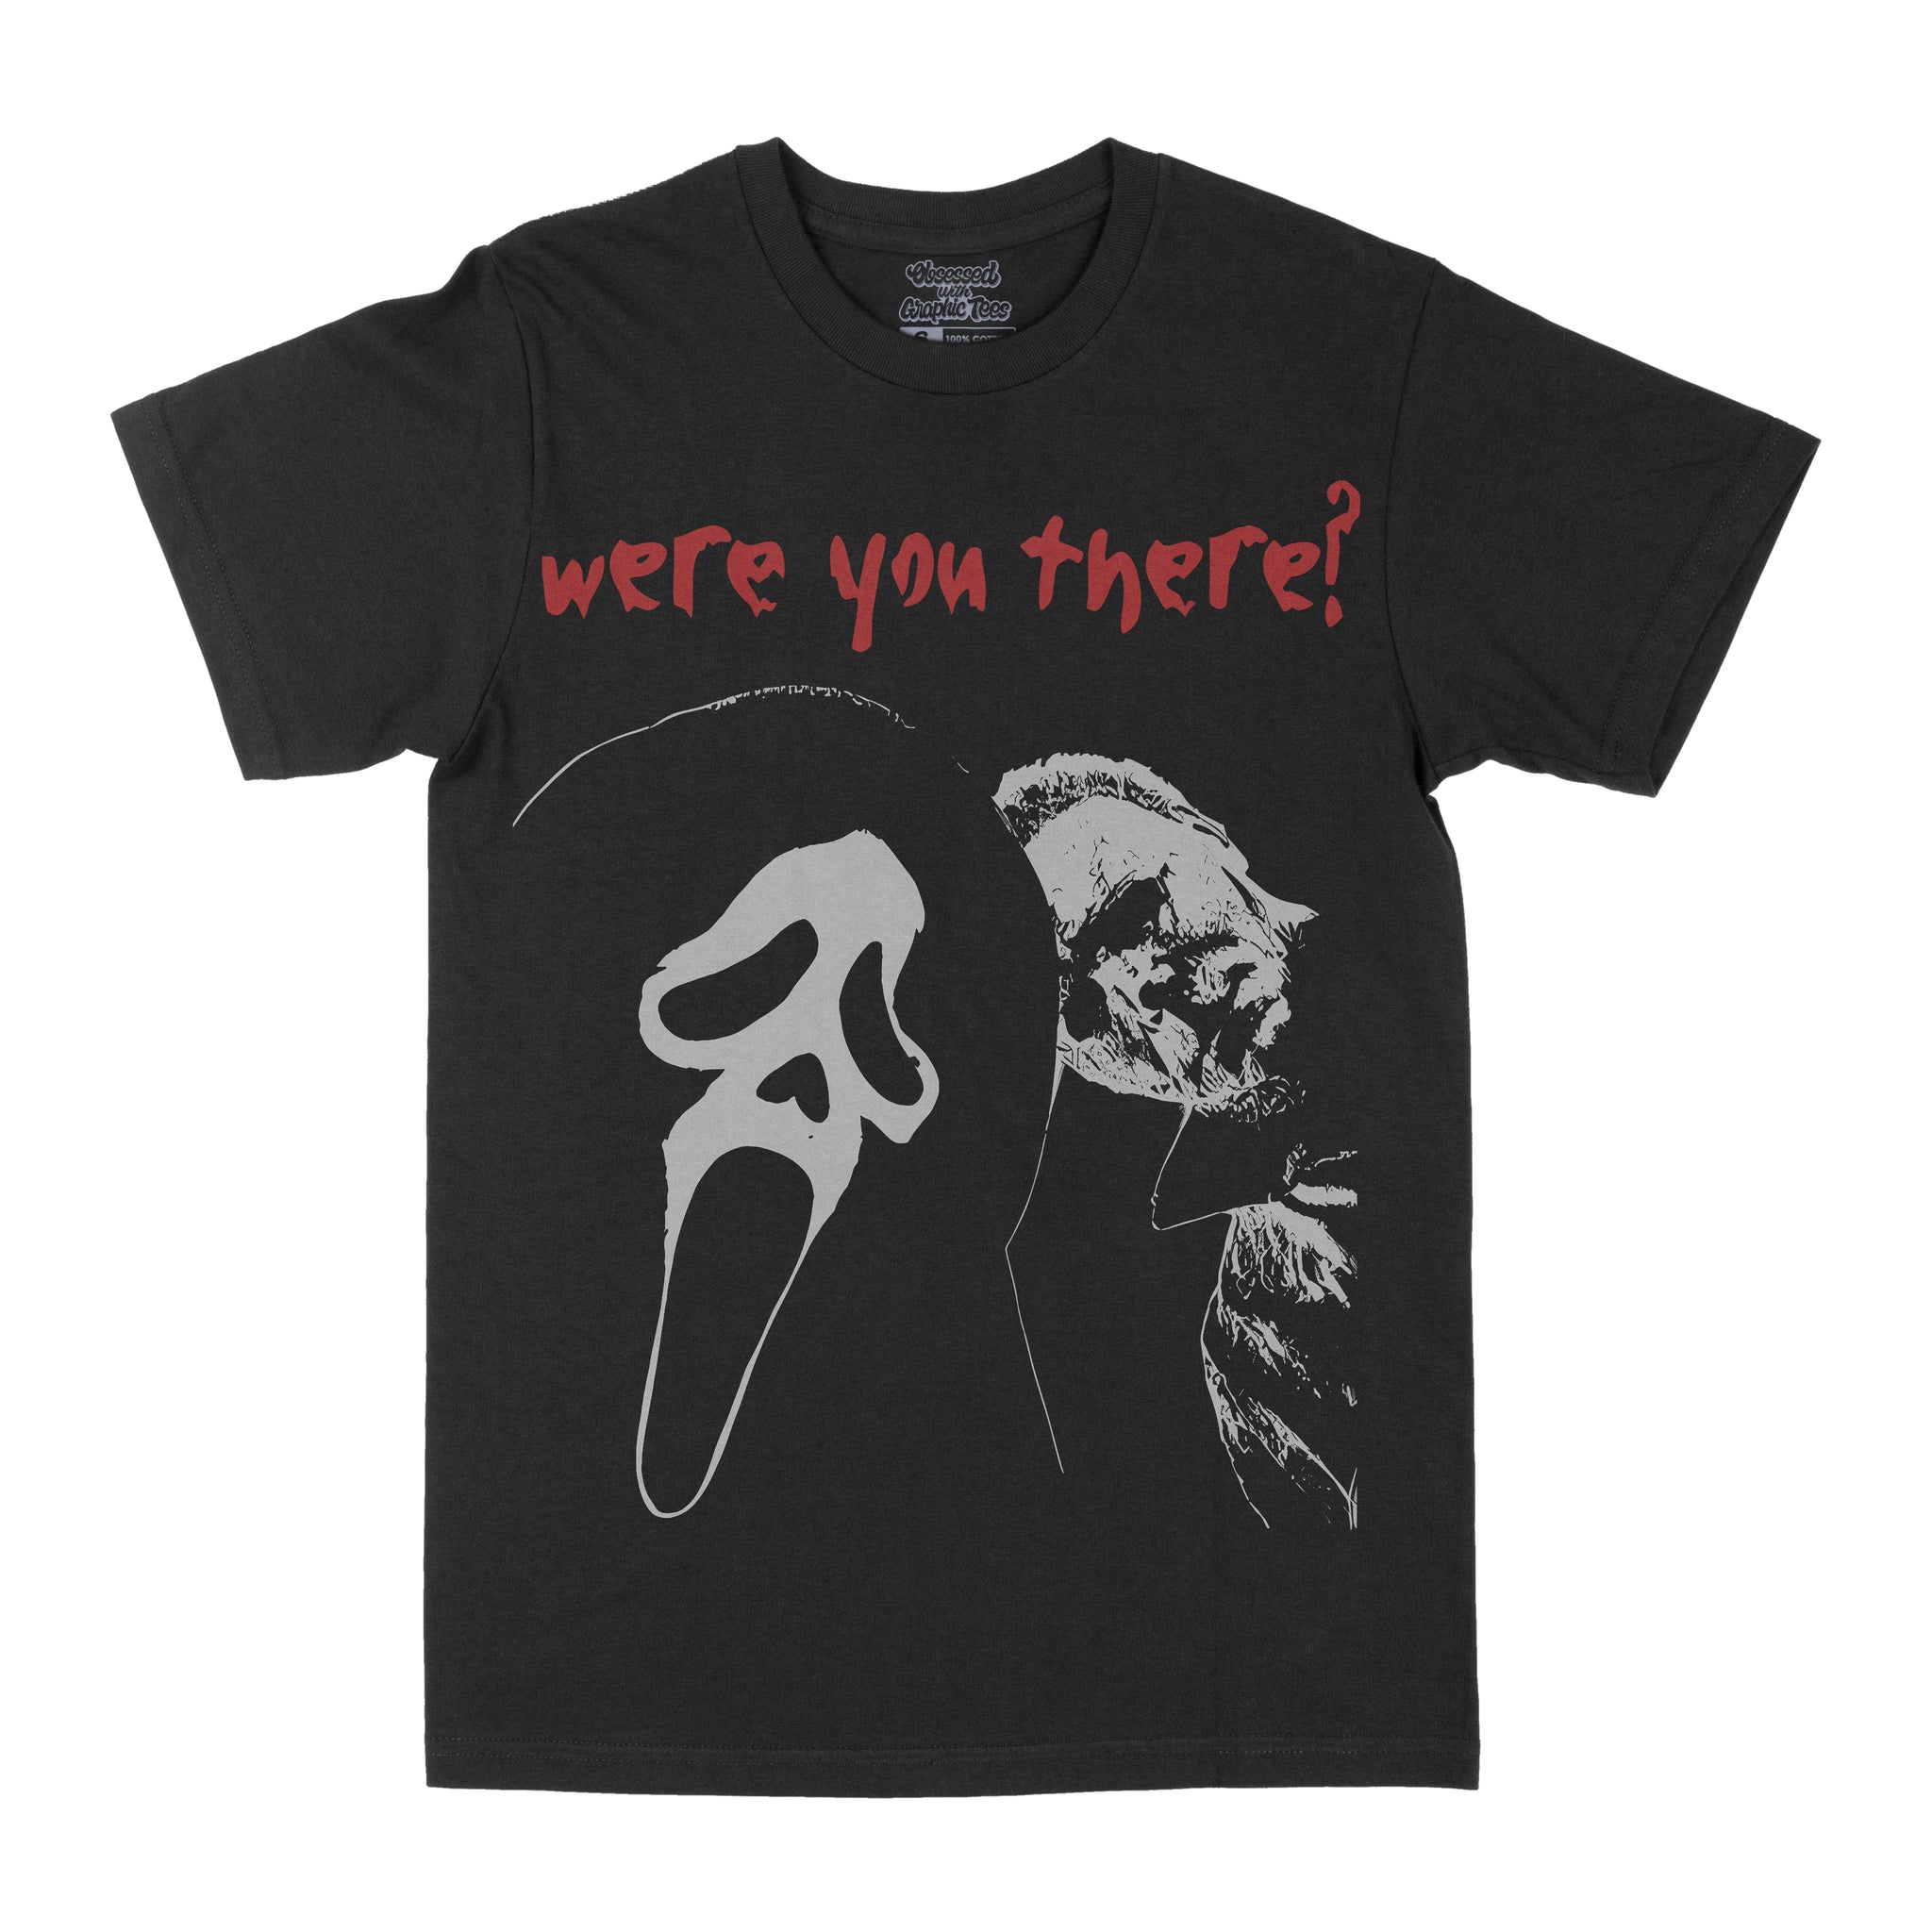 Scream/Myers "Were You There" Graphic Tee